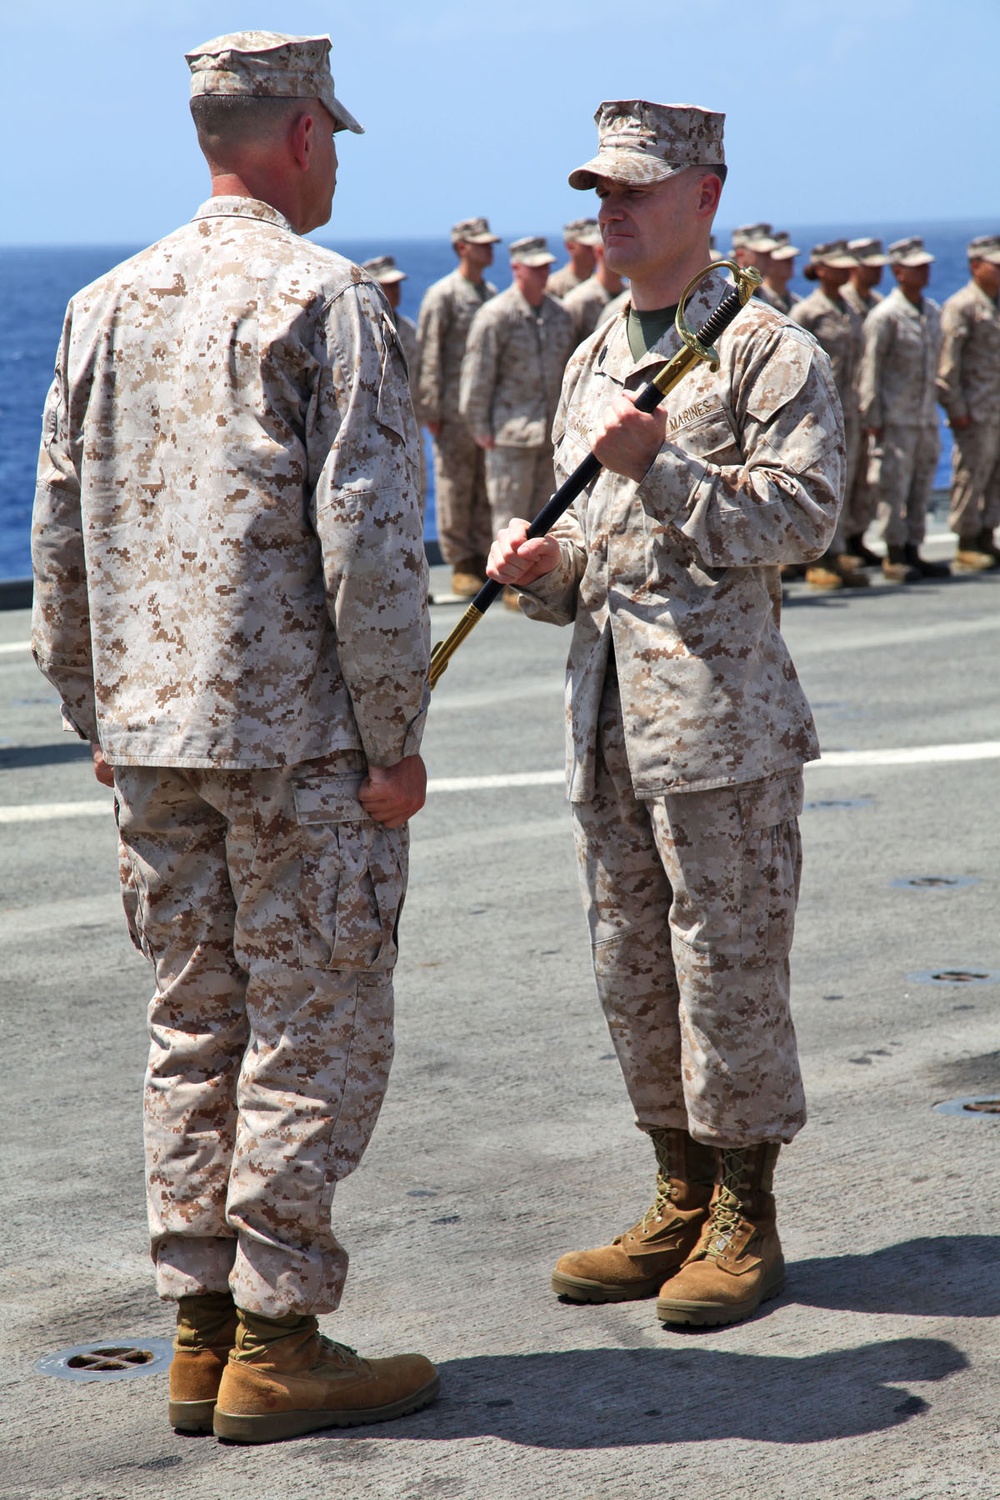 CLB-15 welcomes new sergeant major